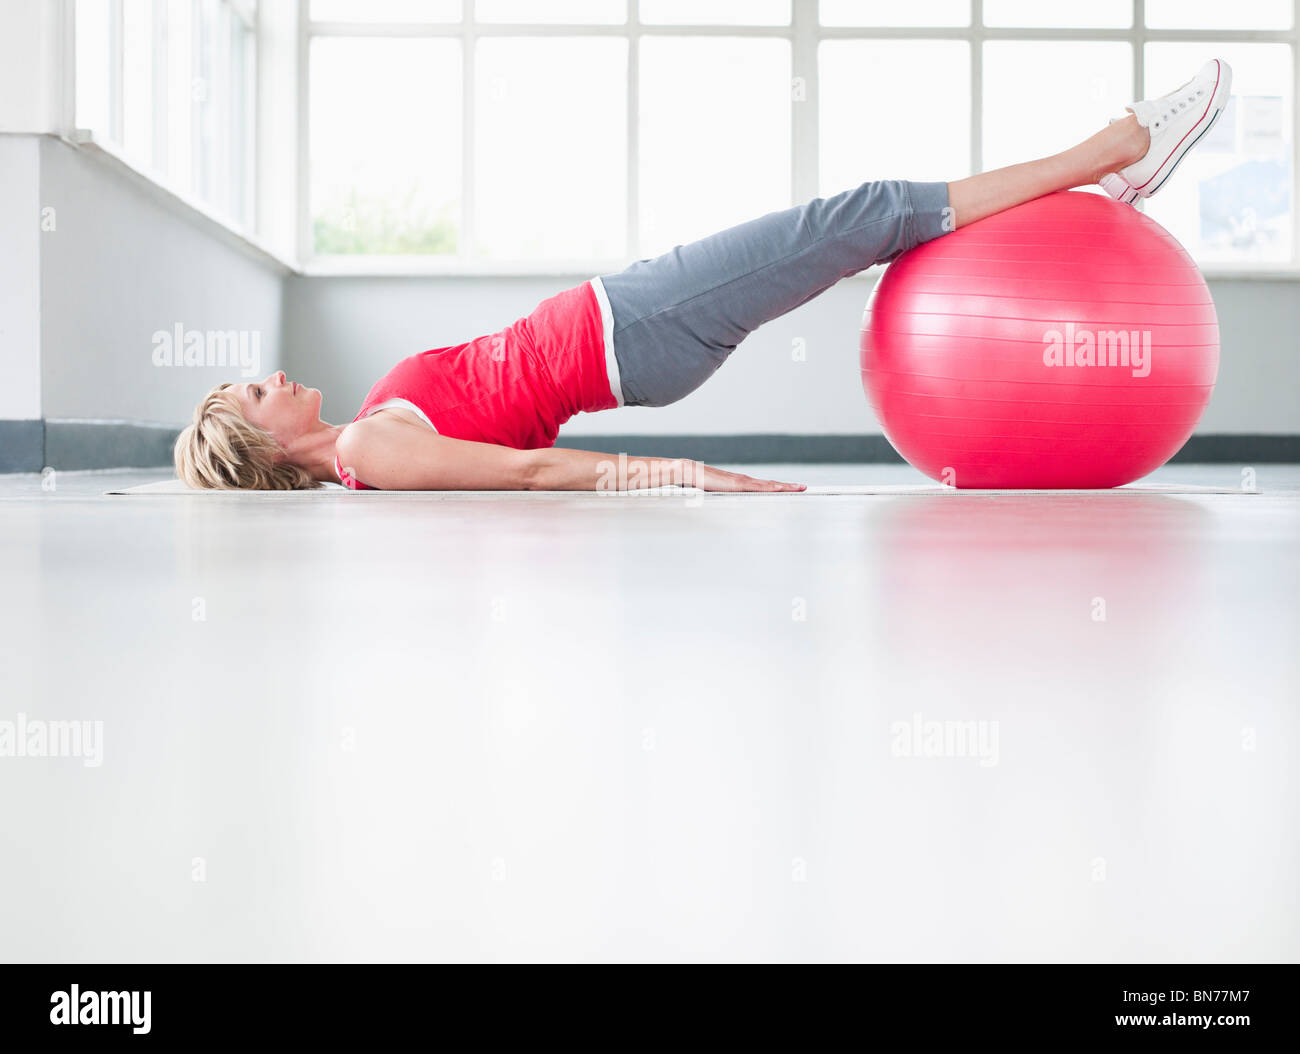 Woman doing leg exercise with gymball Stock Photo